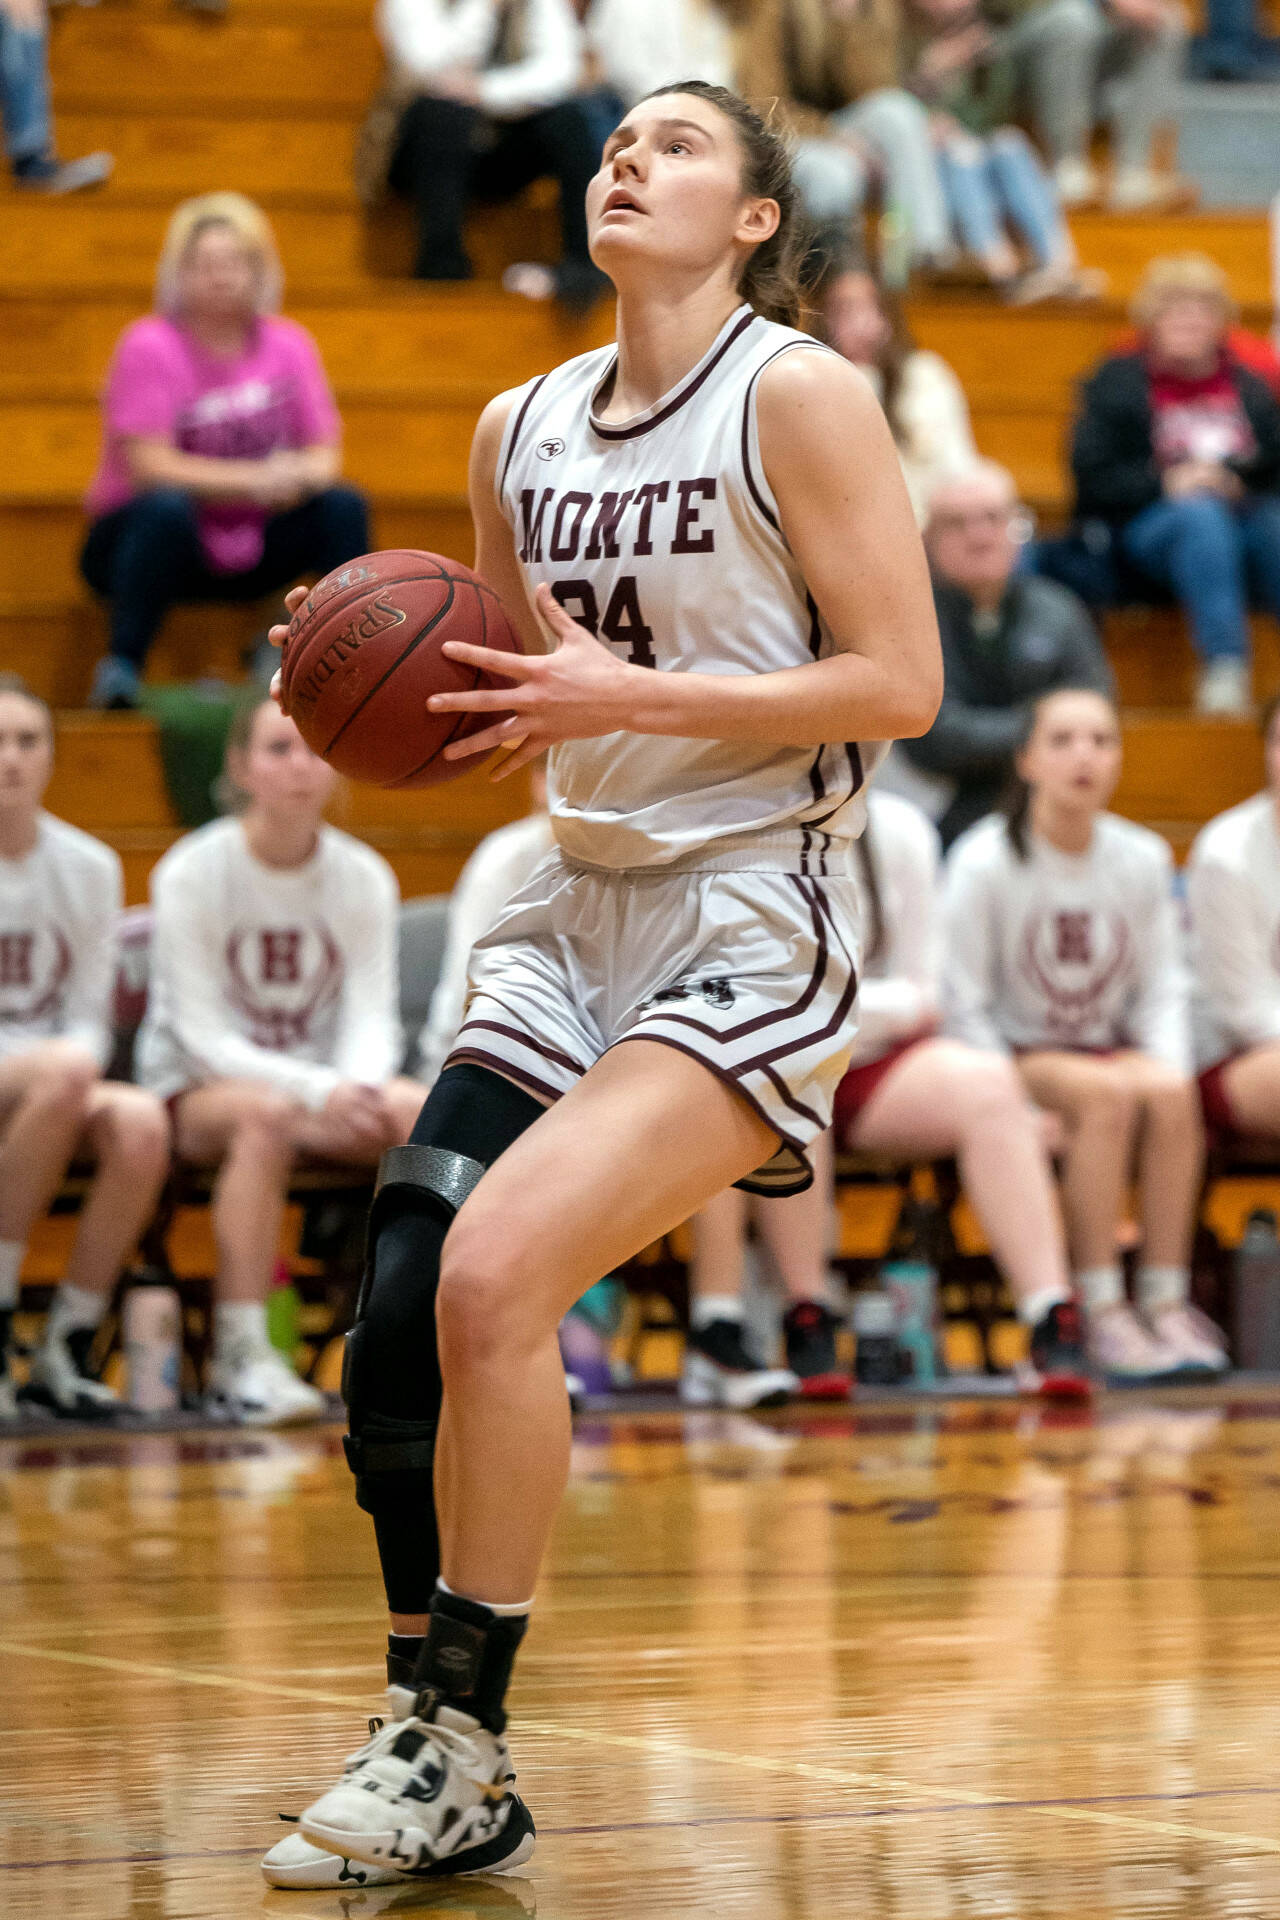 PHOTO BY FOREST WORGUM Montesano senior McKynnlie Dalan, seen here in a file photo, was one of four Bulldogs to scored in double figures in a 67-5 win over Tenino on Thursday in Montesano.